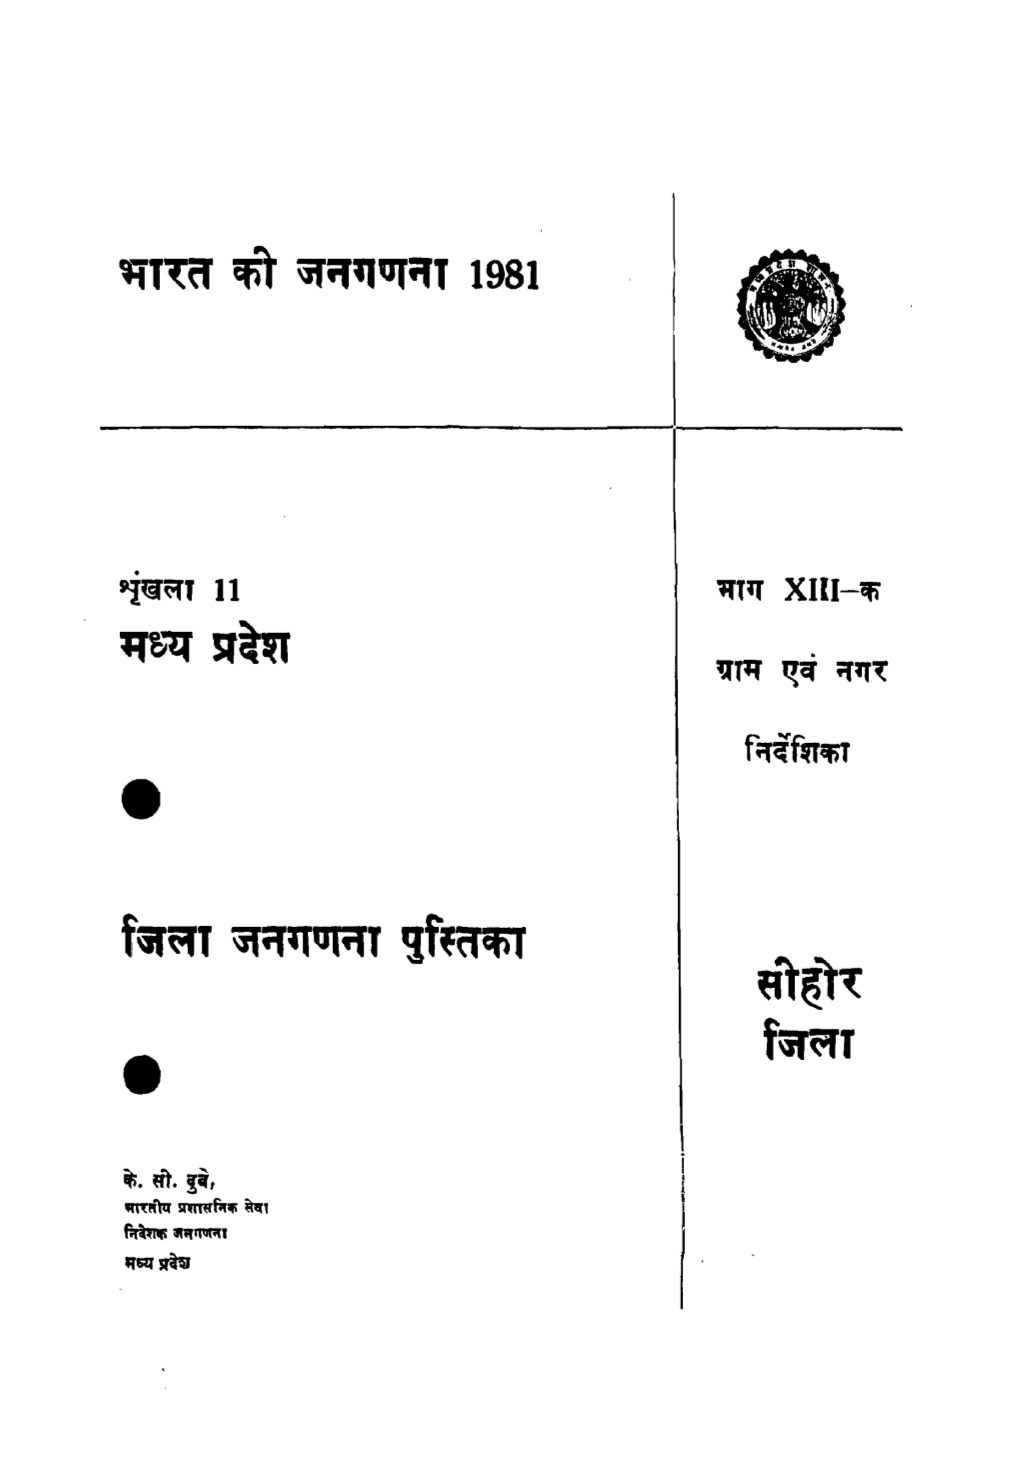 District Census Handbook, Sehore, Part XIII-A, Series-11